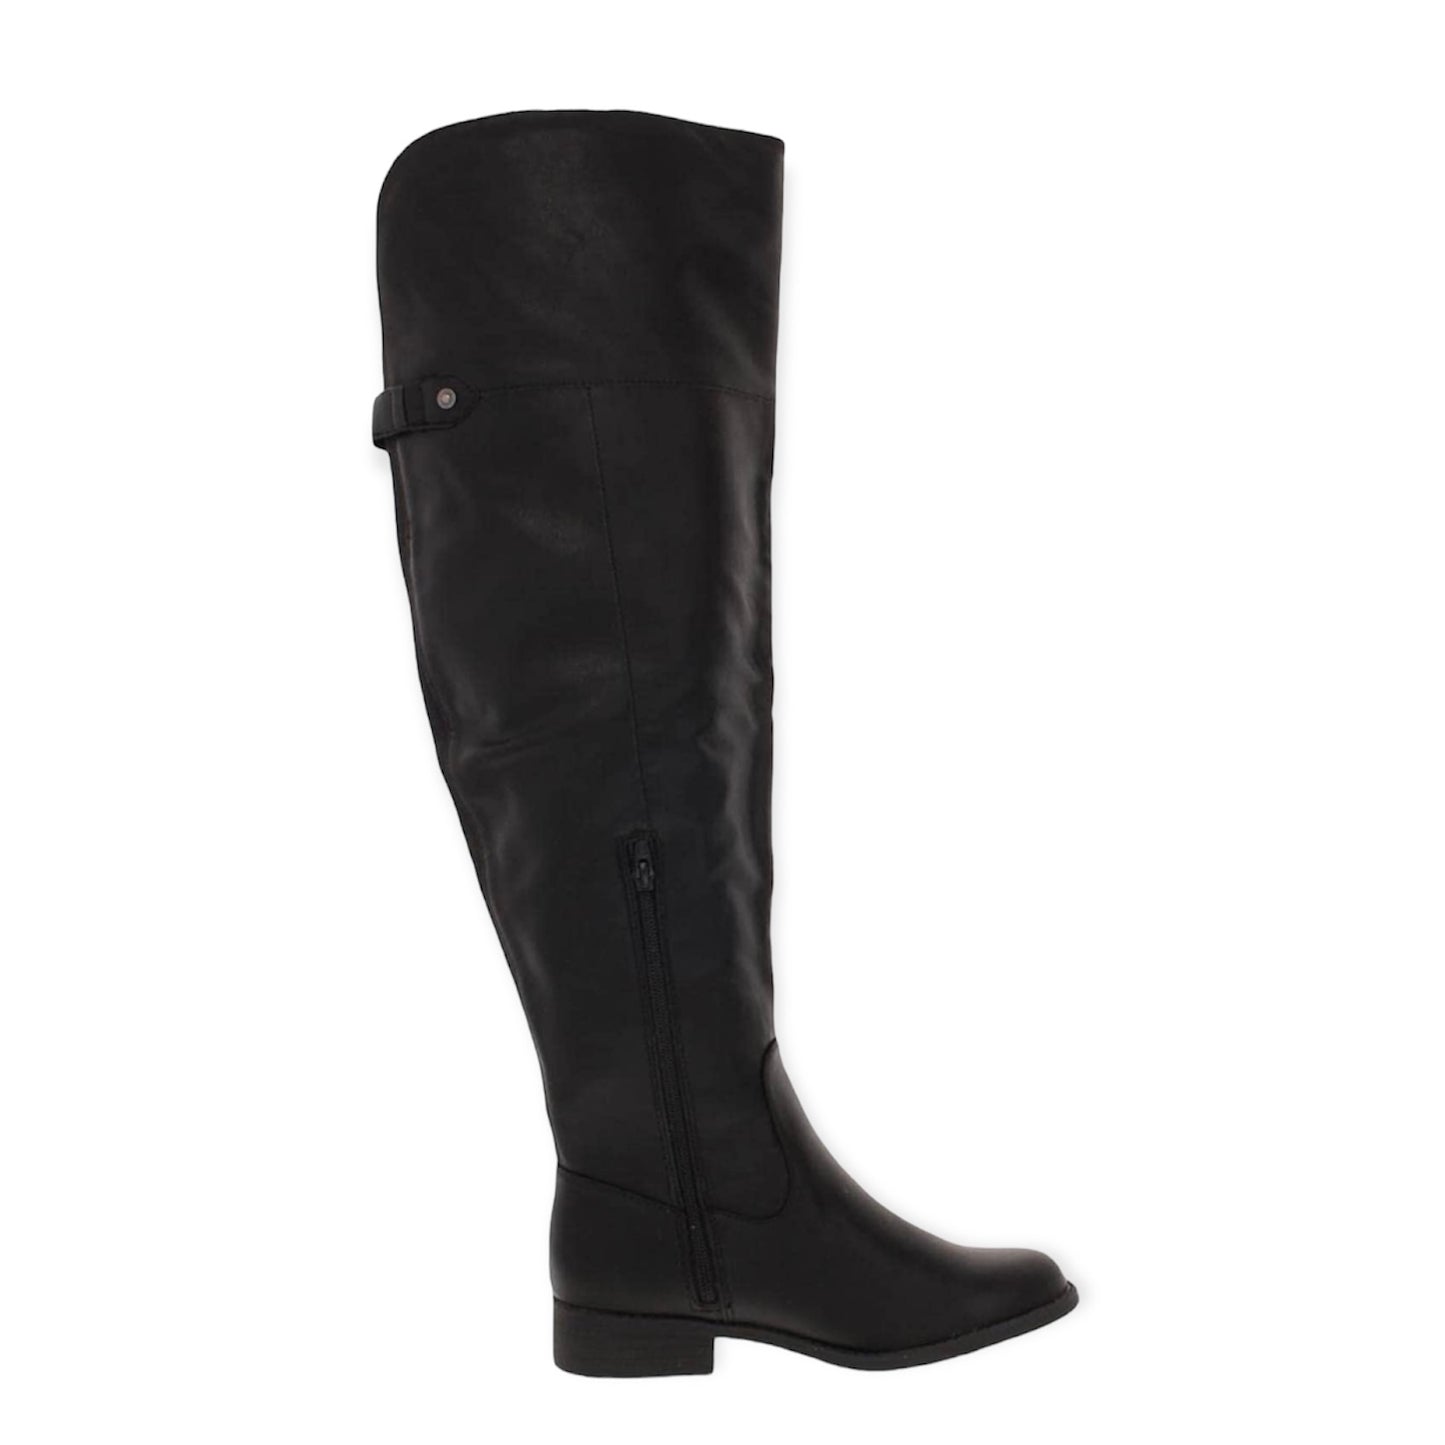 ALLICCE Over Knee Boots Women's Shoes